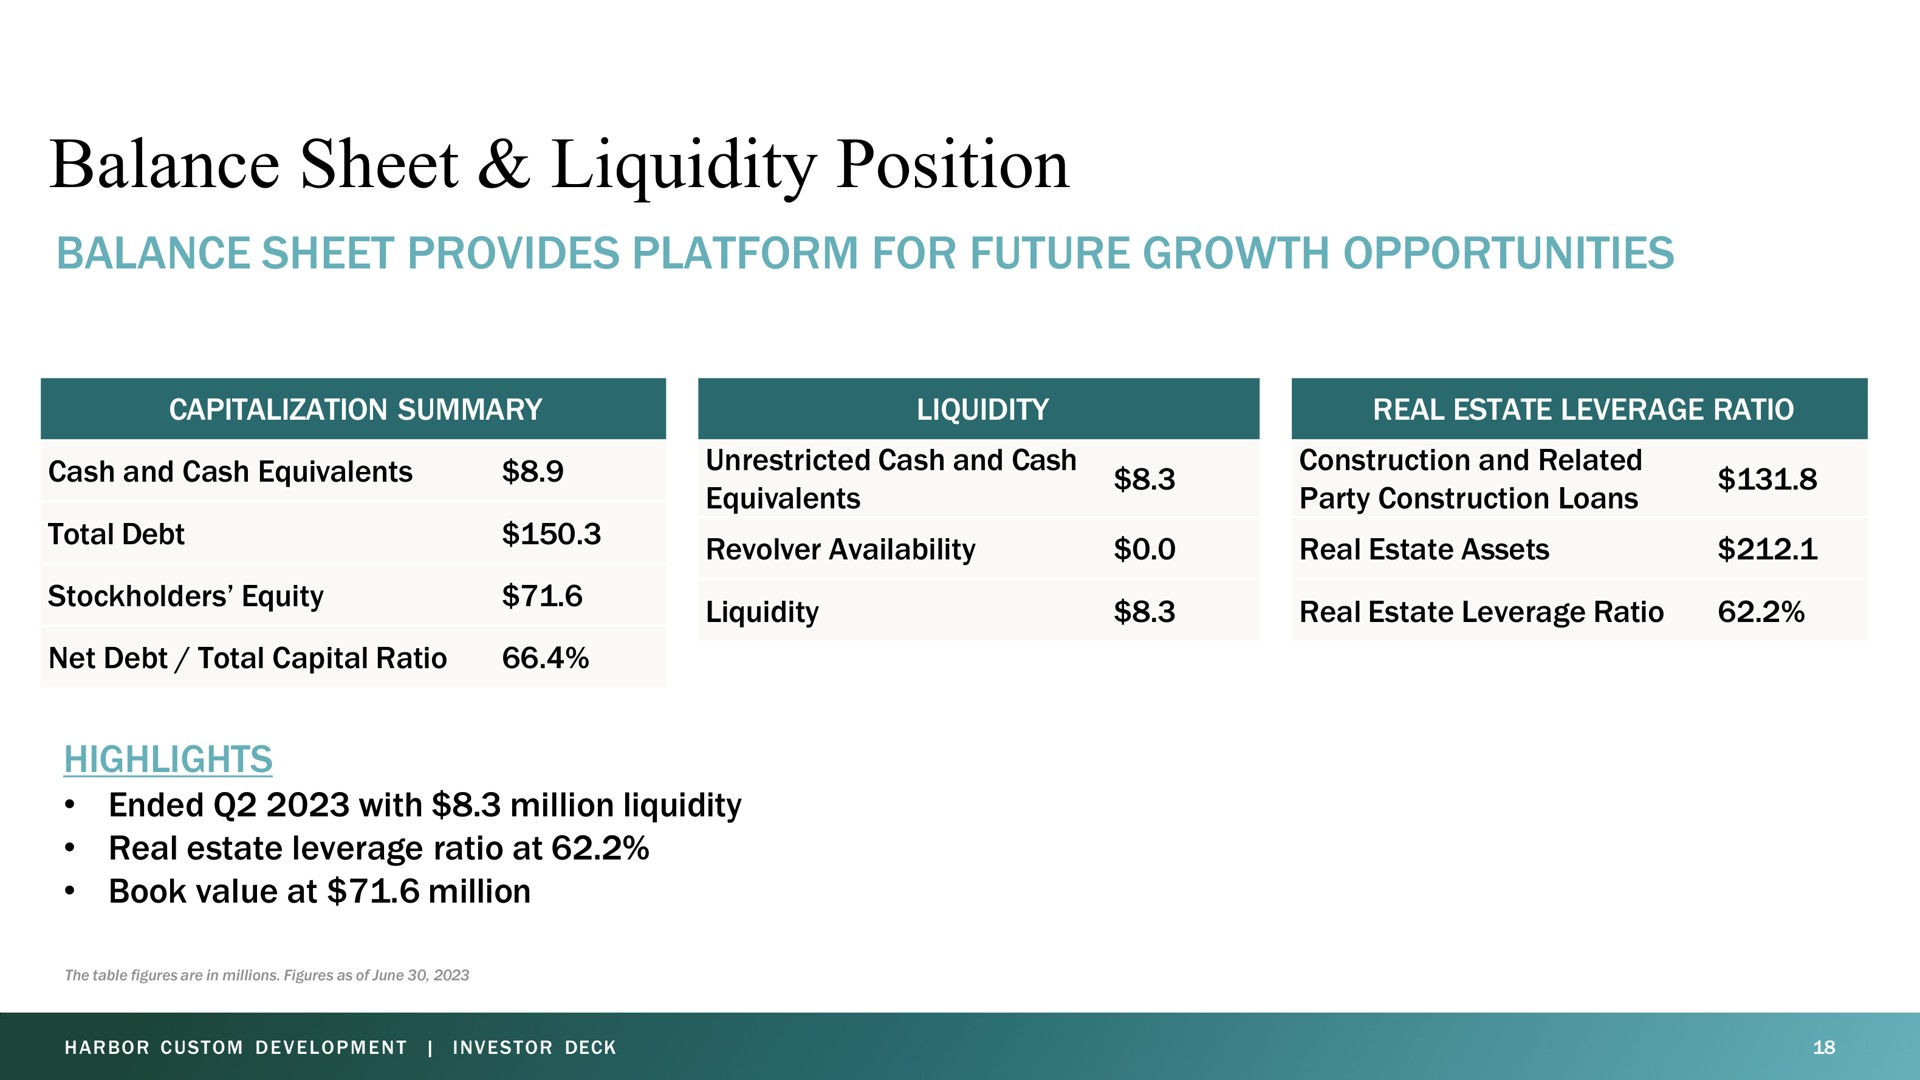 balance sheet liquidity position balance sheet provides platform for future growth opportunities capitalization summary liquidity real estate leverage ratio cash and cash equivalents total debt stockholders equity net debt total capital ratio unrestricted cash and cash equivalents revolver availability liquidity construction and related party construction loans real estate assets real estate leverage ratio highlights ended with million liquidity real estate leverage ratio at book value at million a a pare | Harbor Custom Development